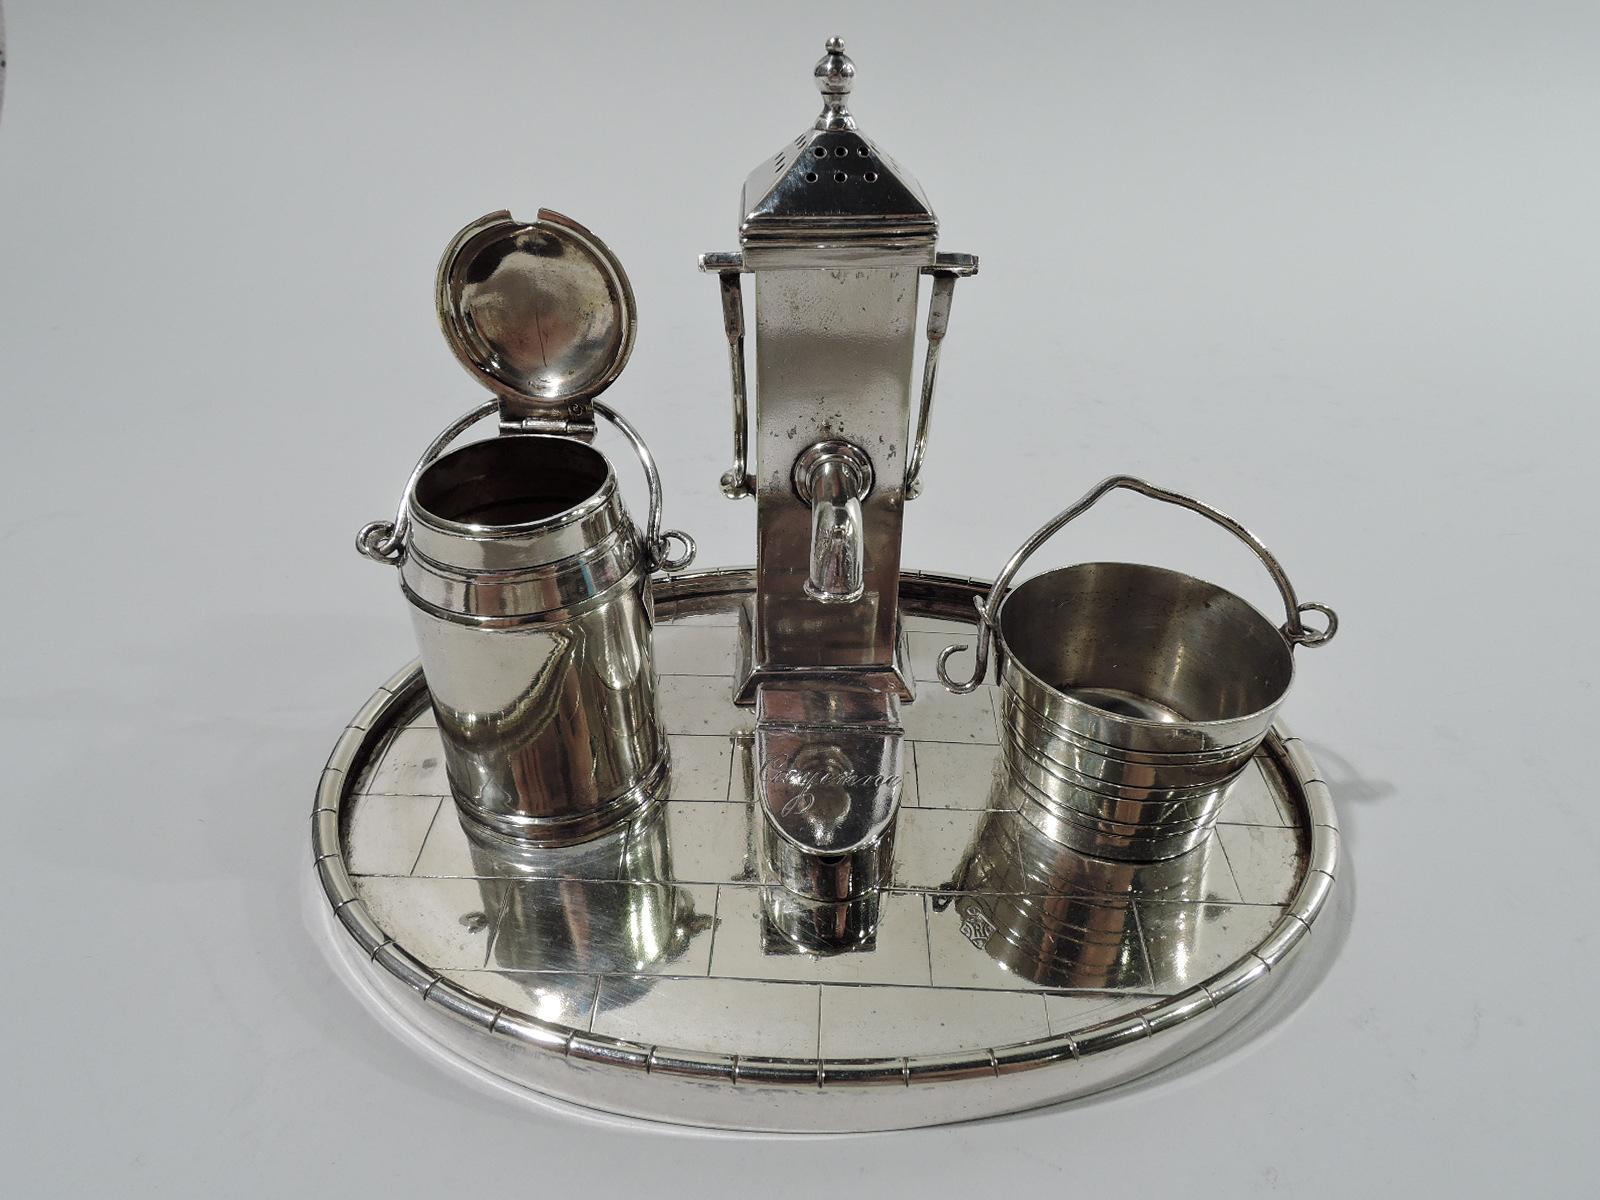 English Victorian silver-plated novelty condiment set, ca 1872. Oval base with “bricked” floor mounted with water-pump pepper shaker: Rectilinear shaft with pierced and faceted cover and ball finial set in same shaft with 2 fixed handles and spout.